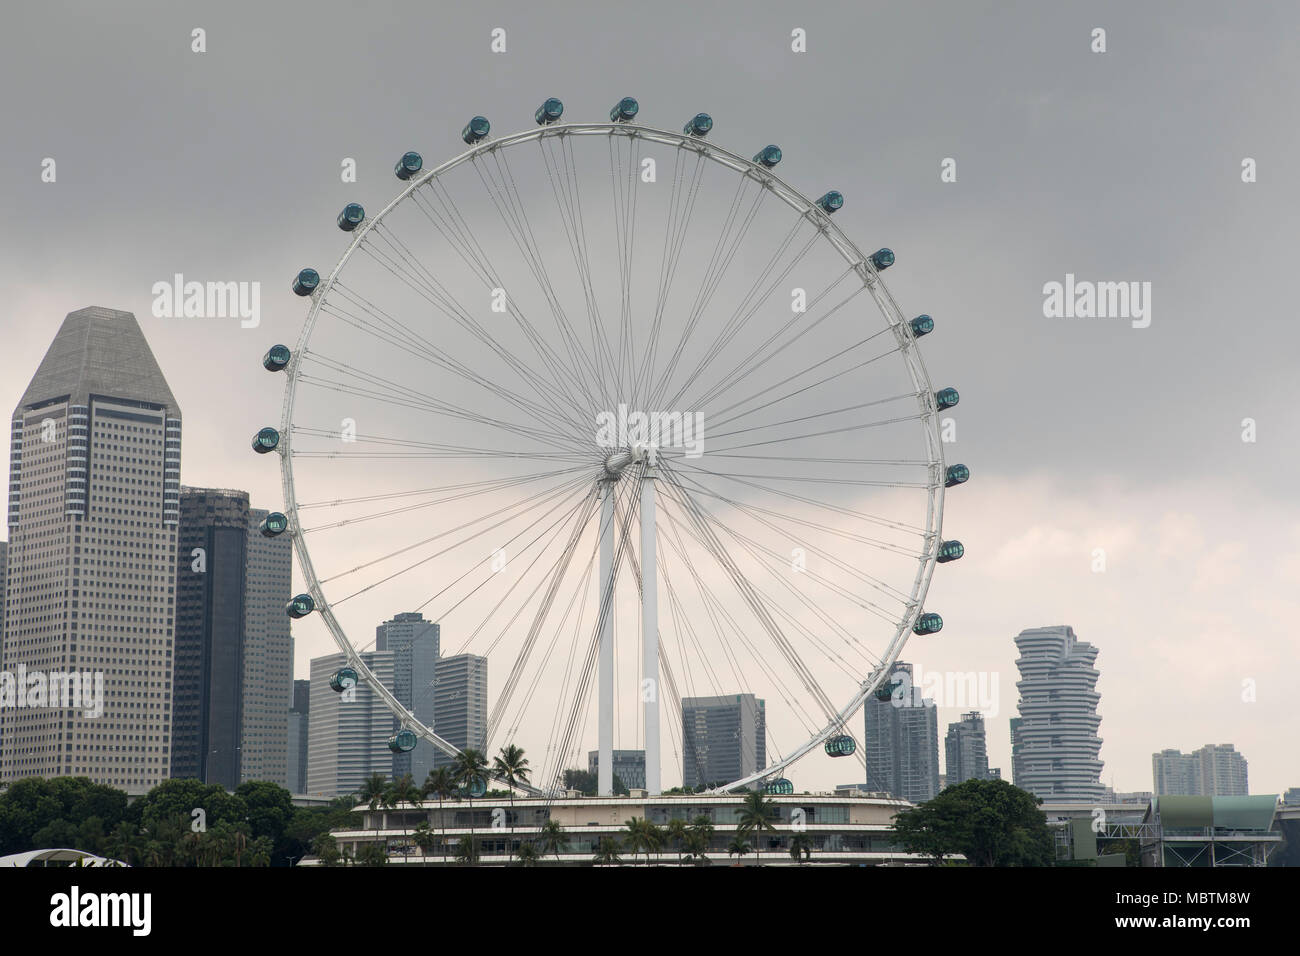 Singapore flyer on a stormy day. Full view with light and dark clouds behind with some buildings of Singapore visible. Stock Photo